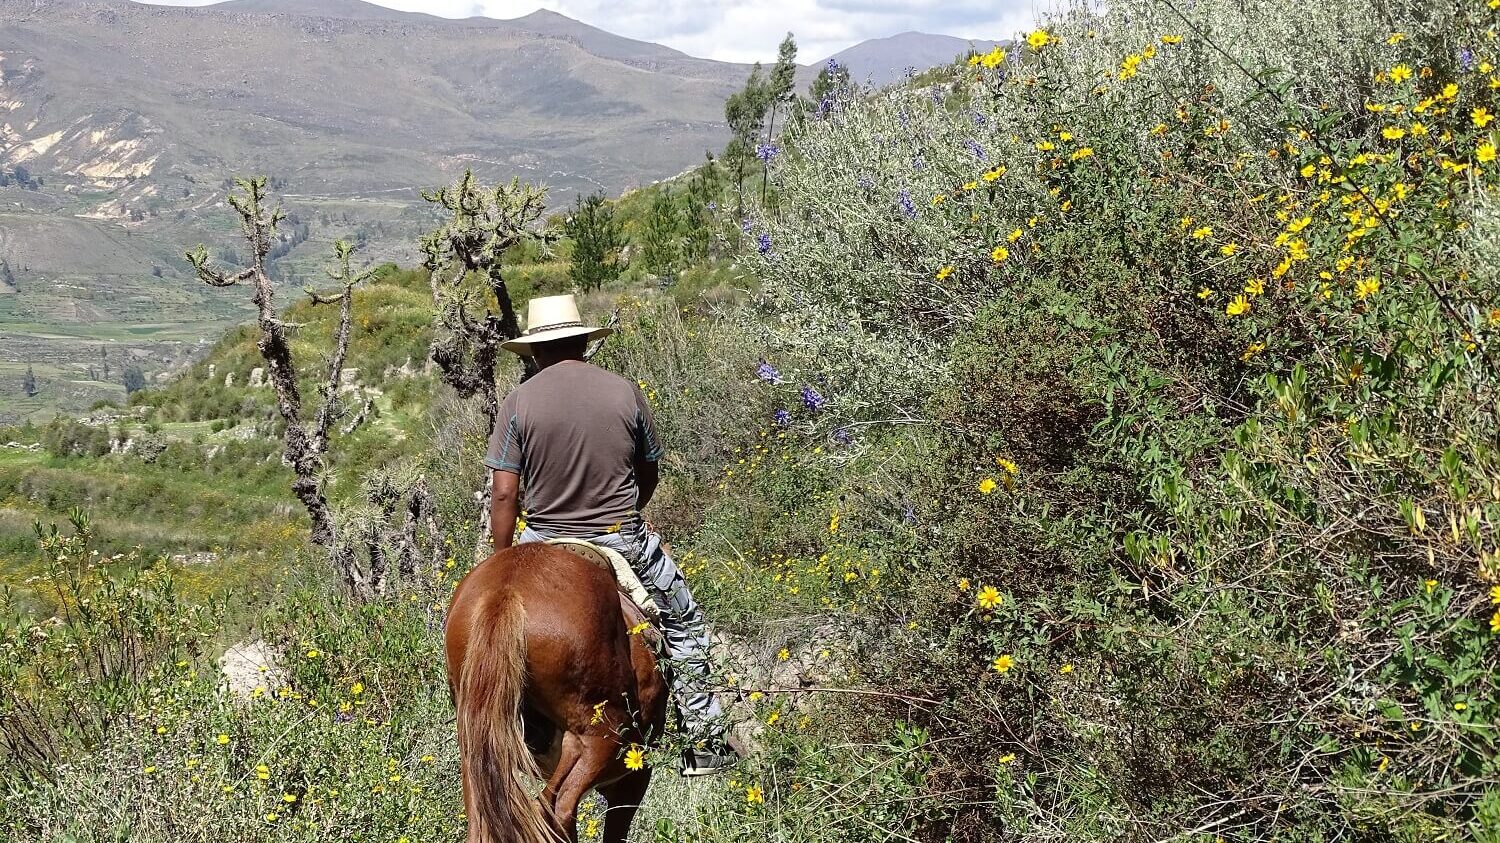 Horseriding from Coporaque in the Colca Canyon, Peru, as part of a homestay programme with RESPONSible Travel Peru